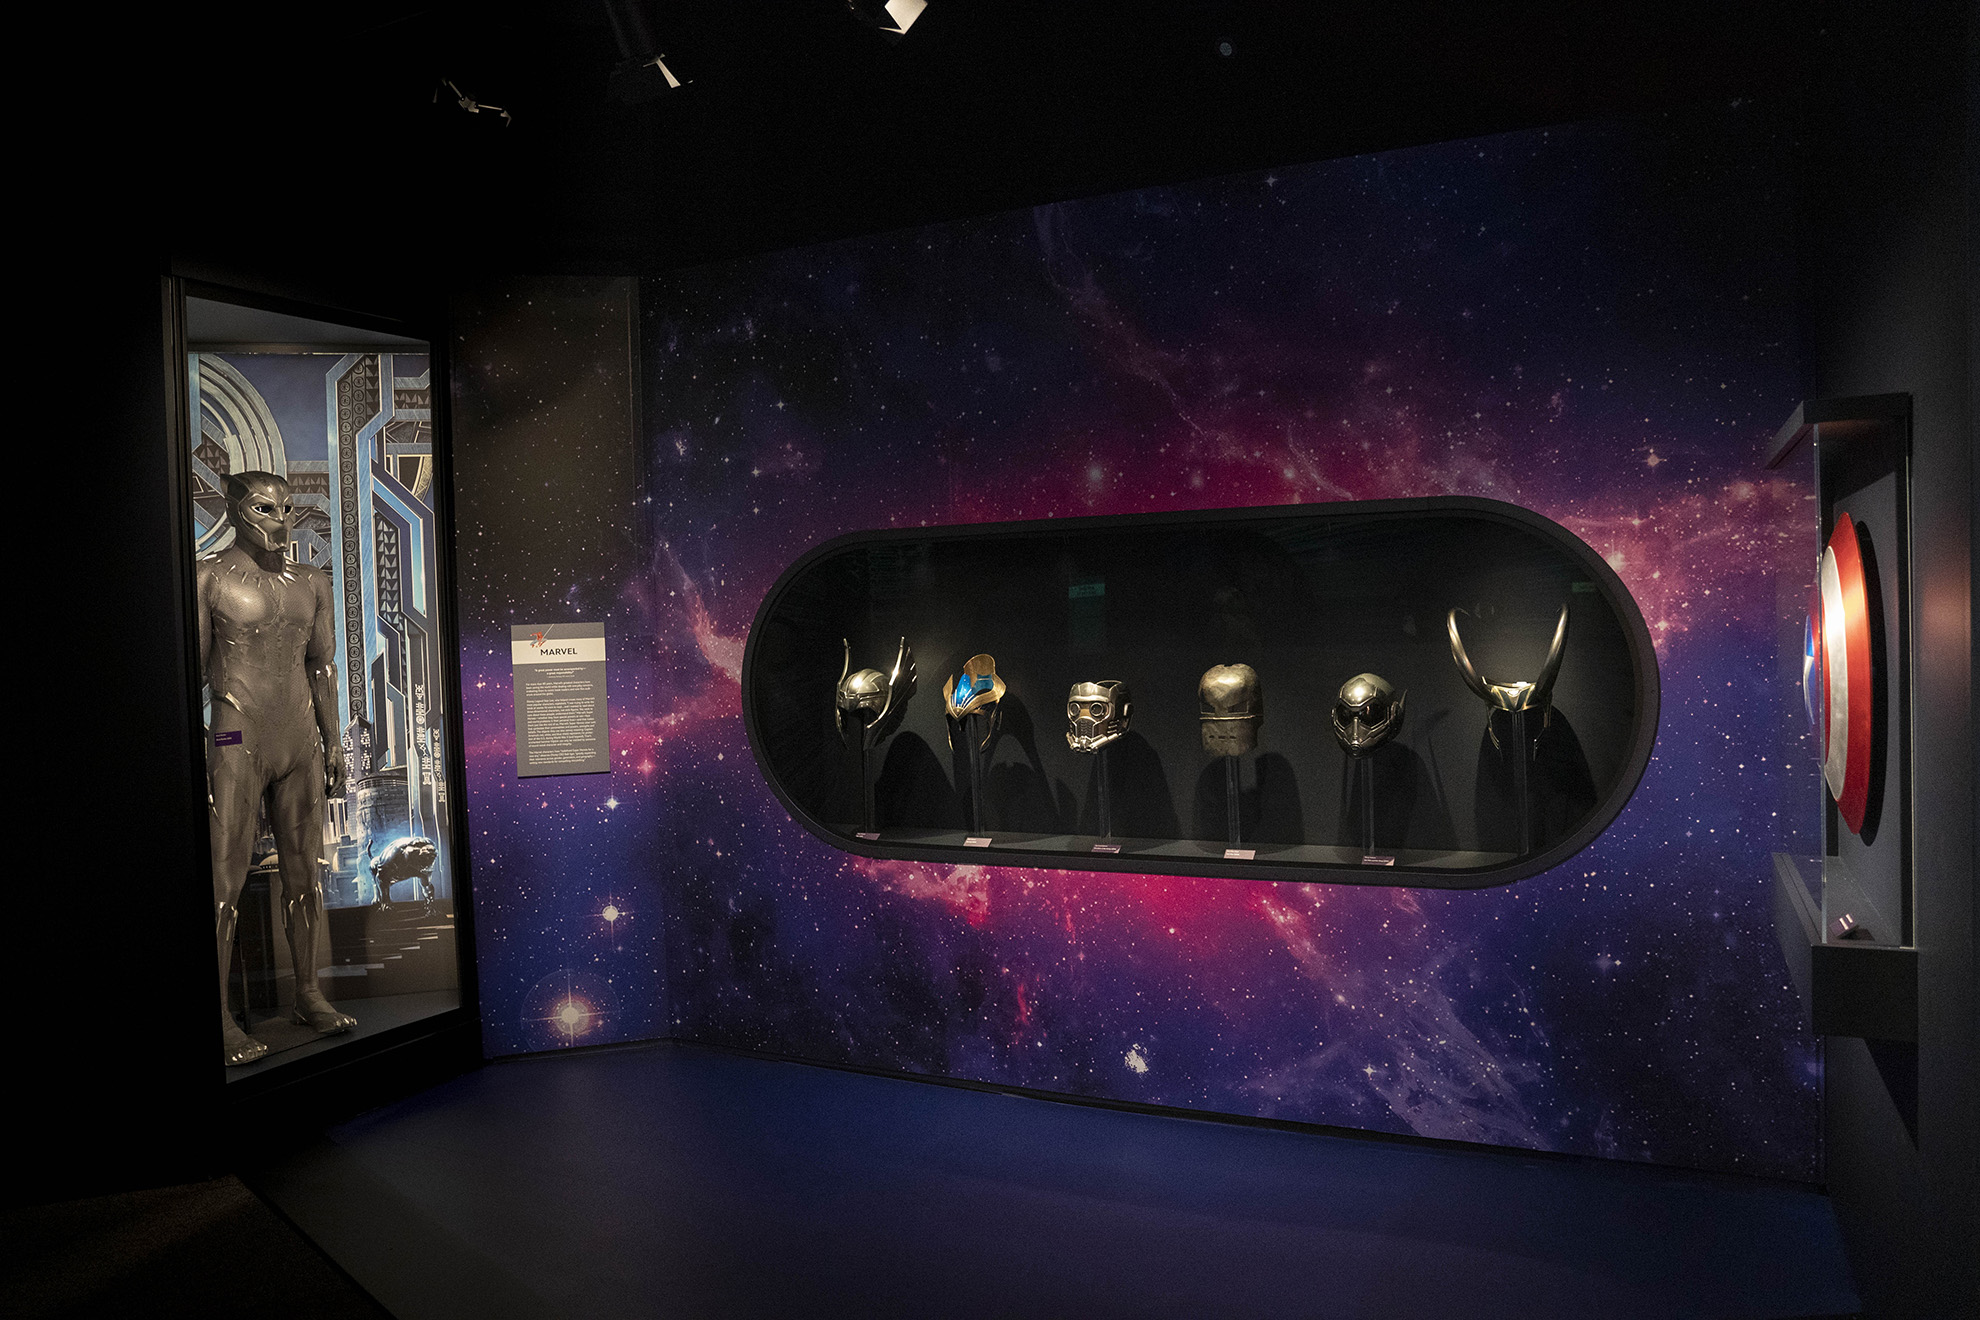 Black Panther costume (Black Panther, 2018), Marvel Studios character helmets and masks, and Captain America shield (Captain America: Civil War, 2016) featured inside The Spirit of Adventure and Discovery gallery at Disney100: The Exhibition, now open at The Franklin Institute in Philadelphia.